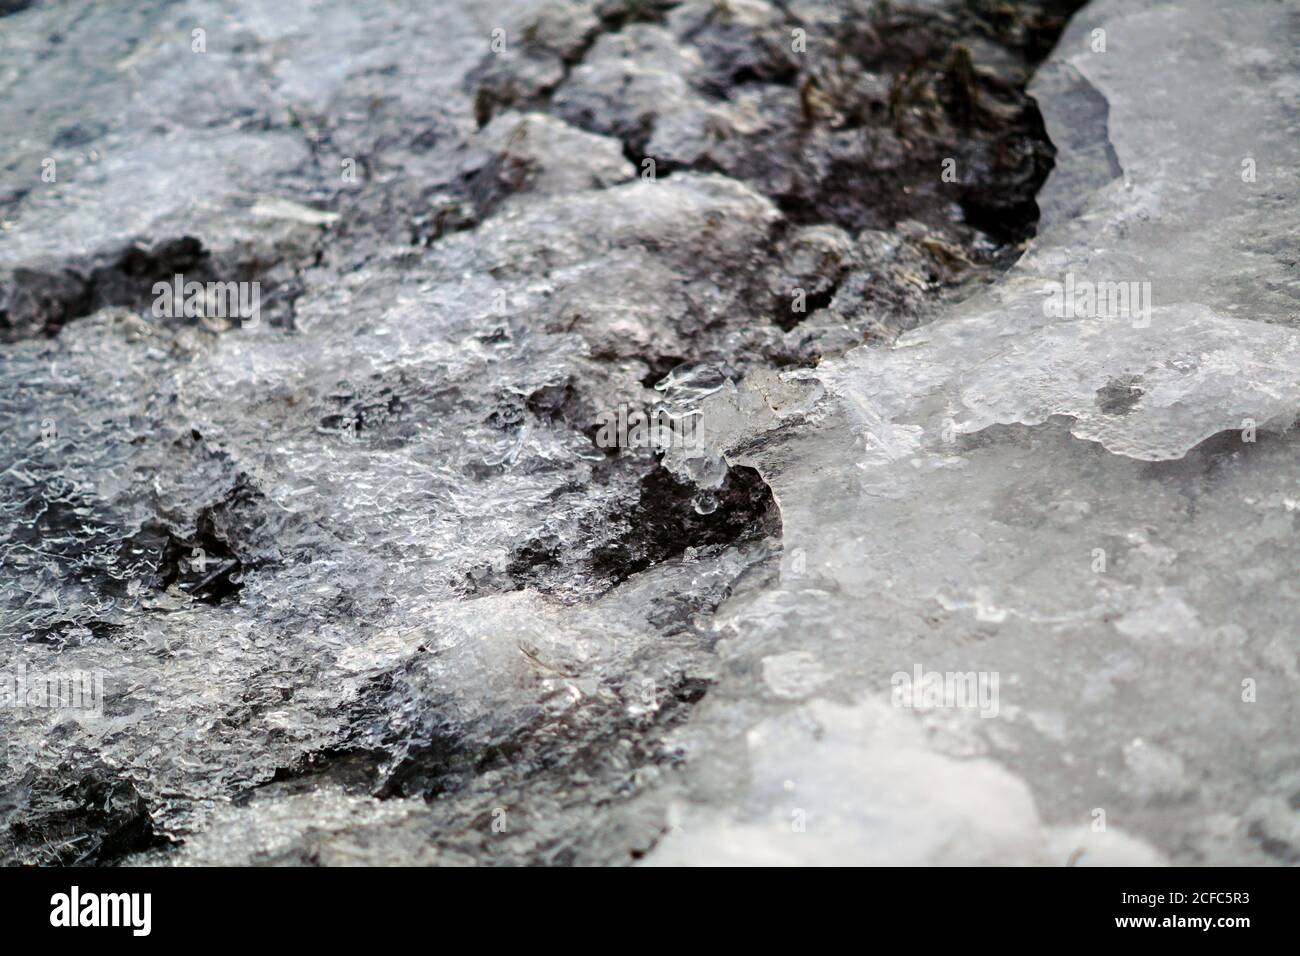 Melting ice and snow on top of rocky surface with pebbles in daylight ...